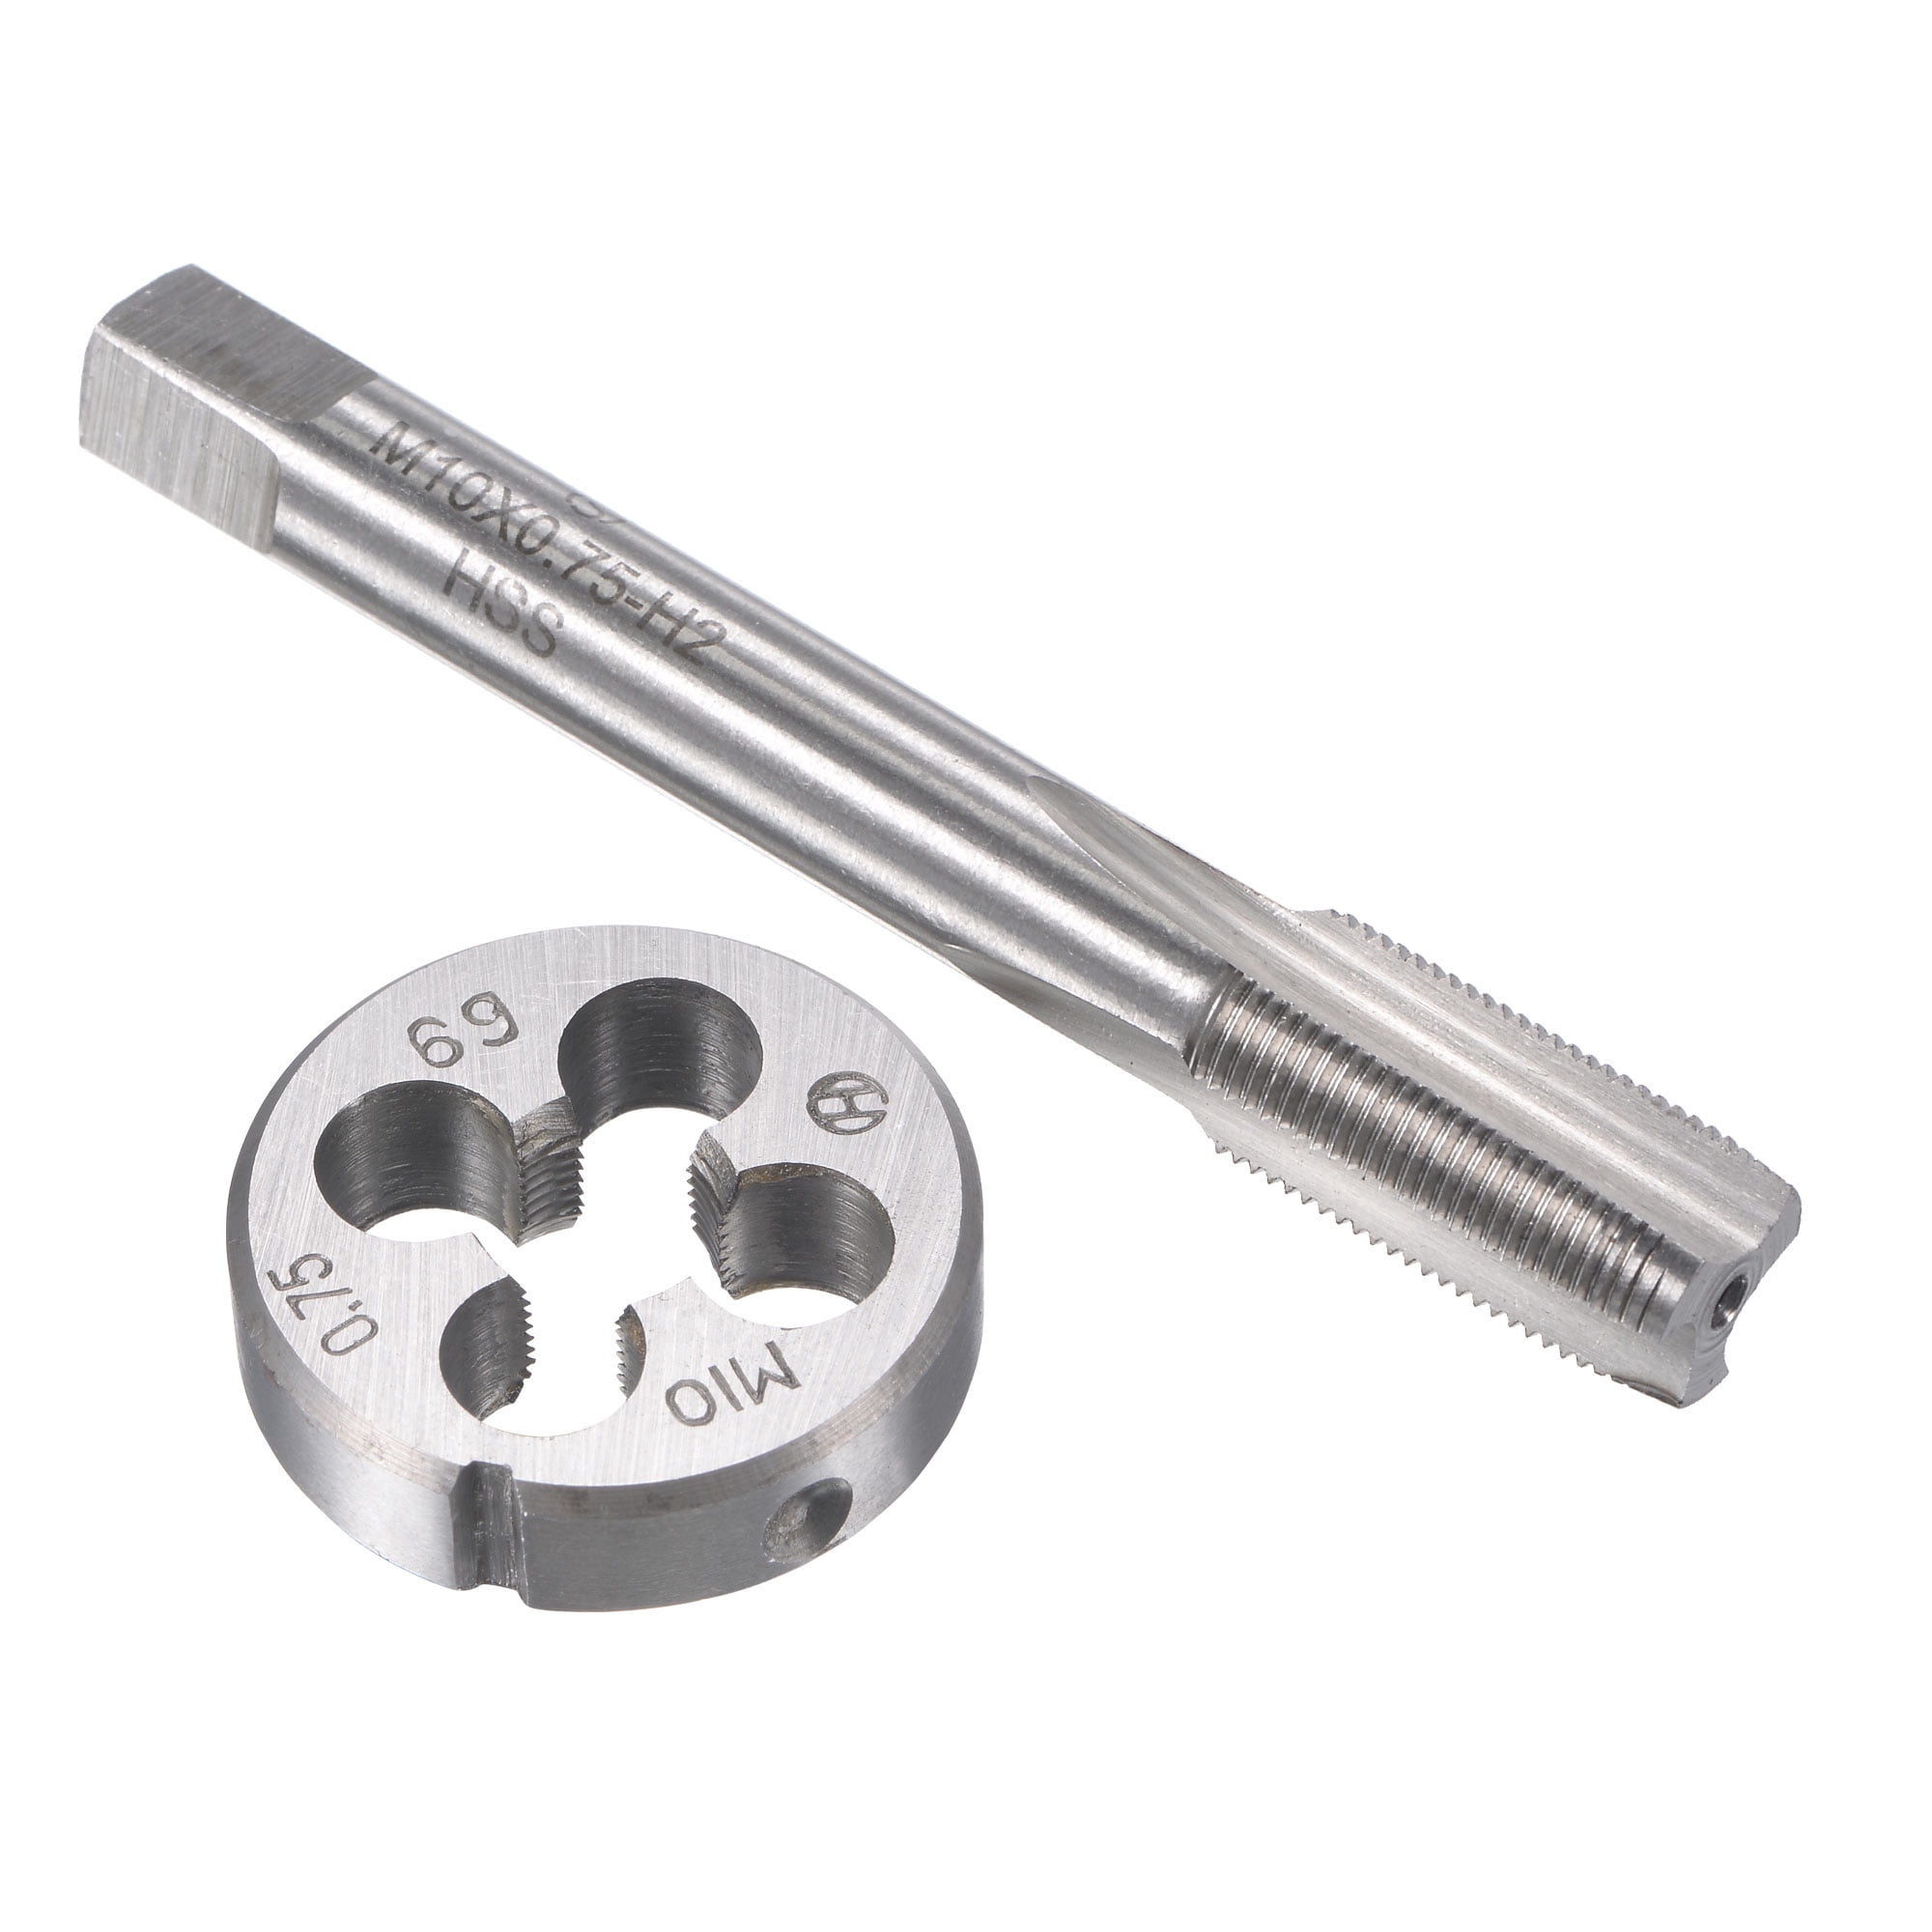 uxcell M10 x 0.5mm Metric Tap and Die Set HSS Machine Thread Screw Tap with Alloy Tool Steel Round Threading Die 